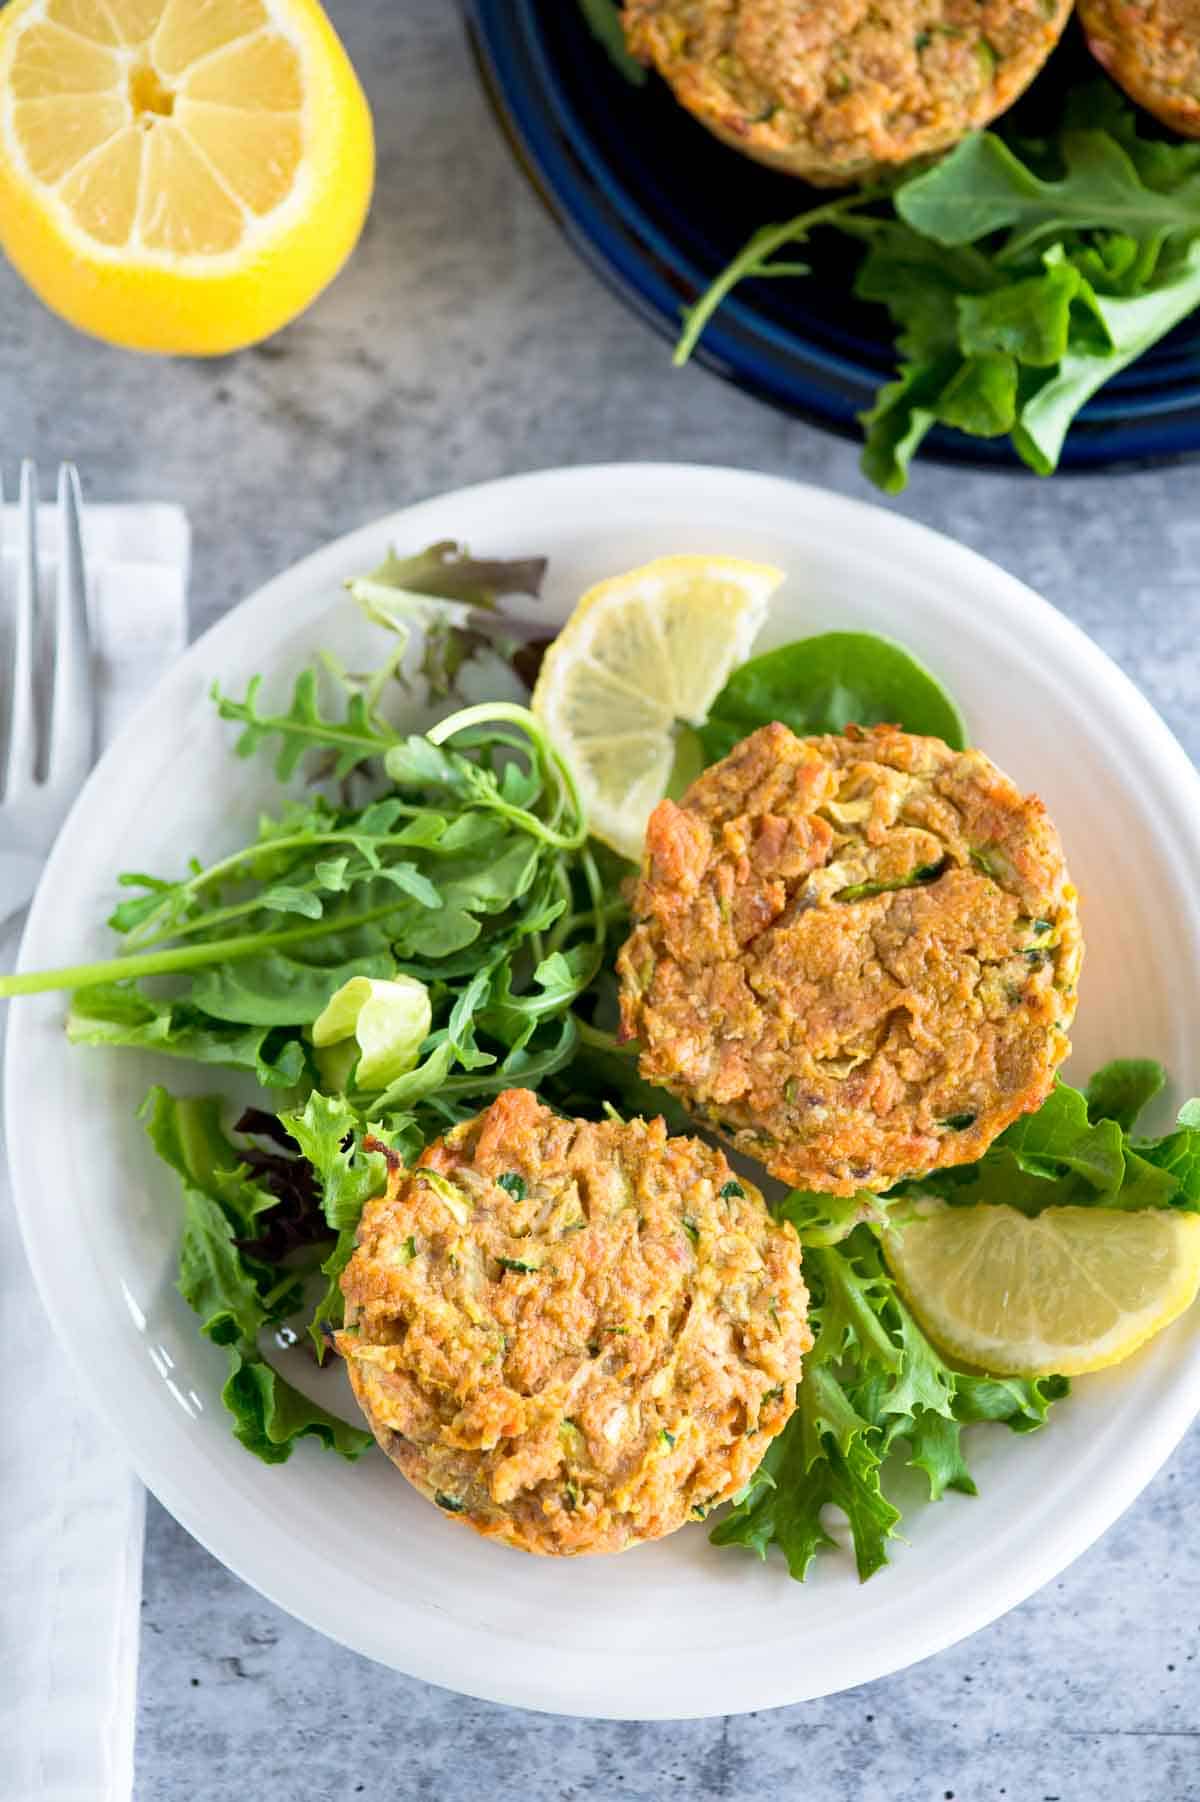 two salmon cakes on a plate with salad greens and lemon